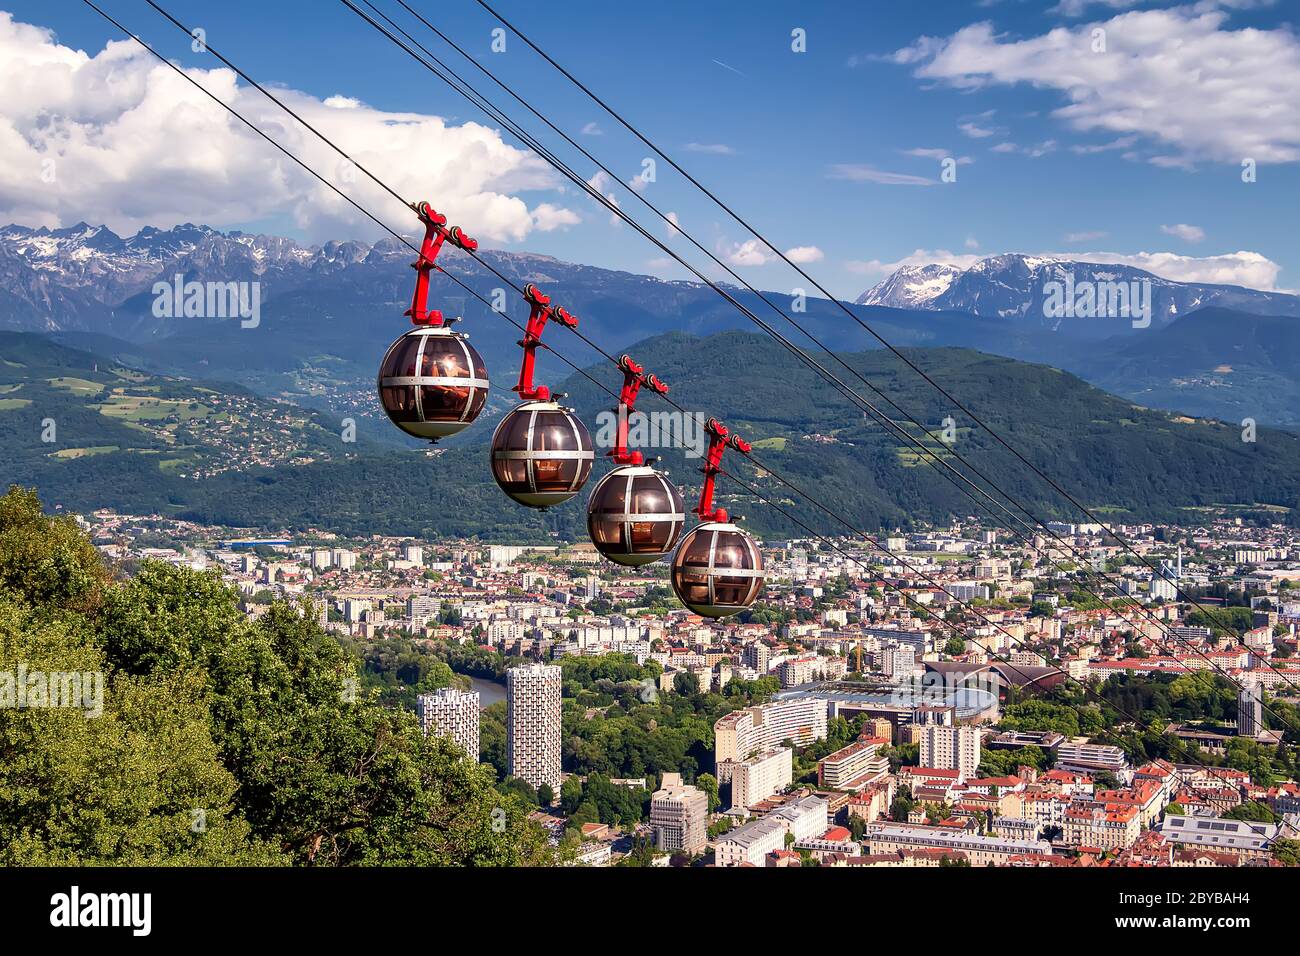 Picturesque aerial view on cable way and city. Grenoble, France. Grenoble-Bastille cable car on the foreground Stock Photo